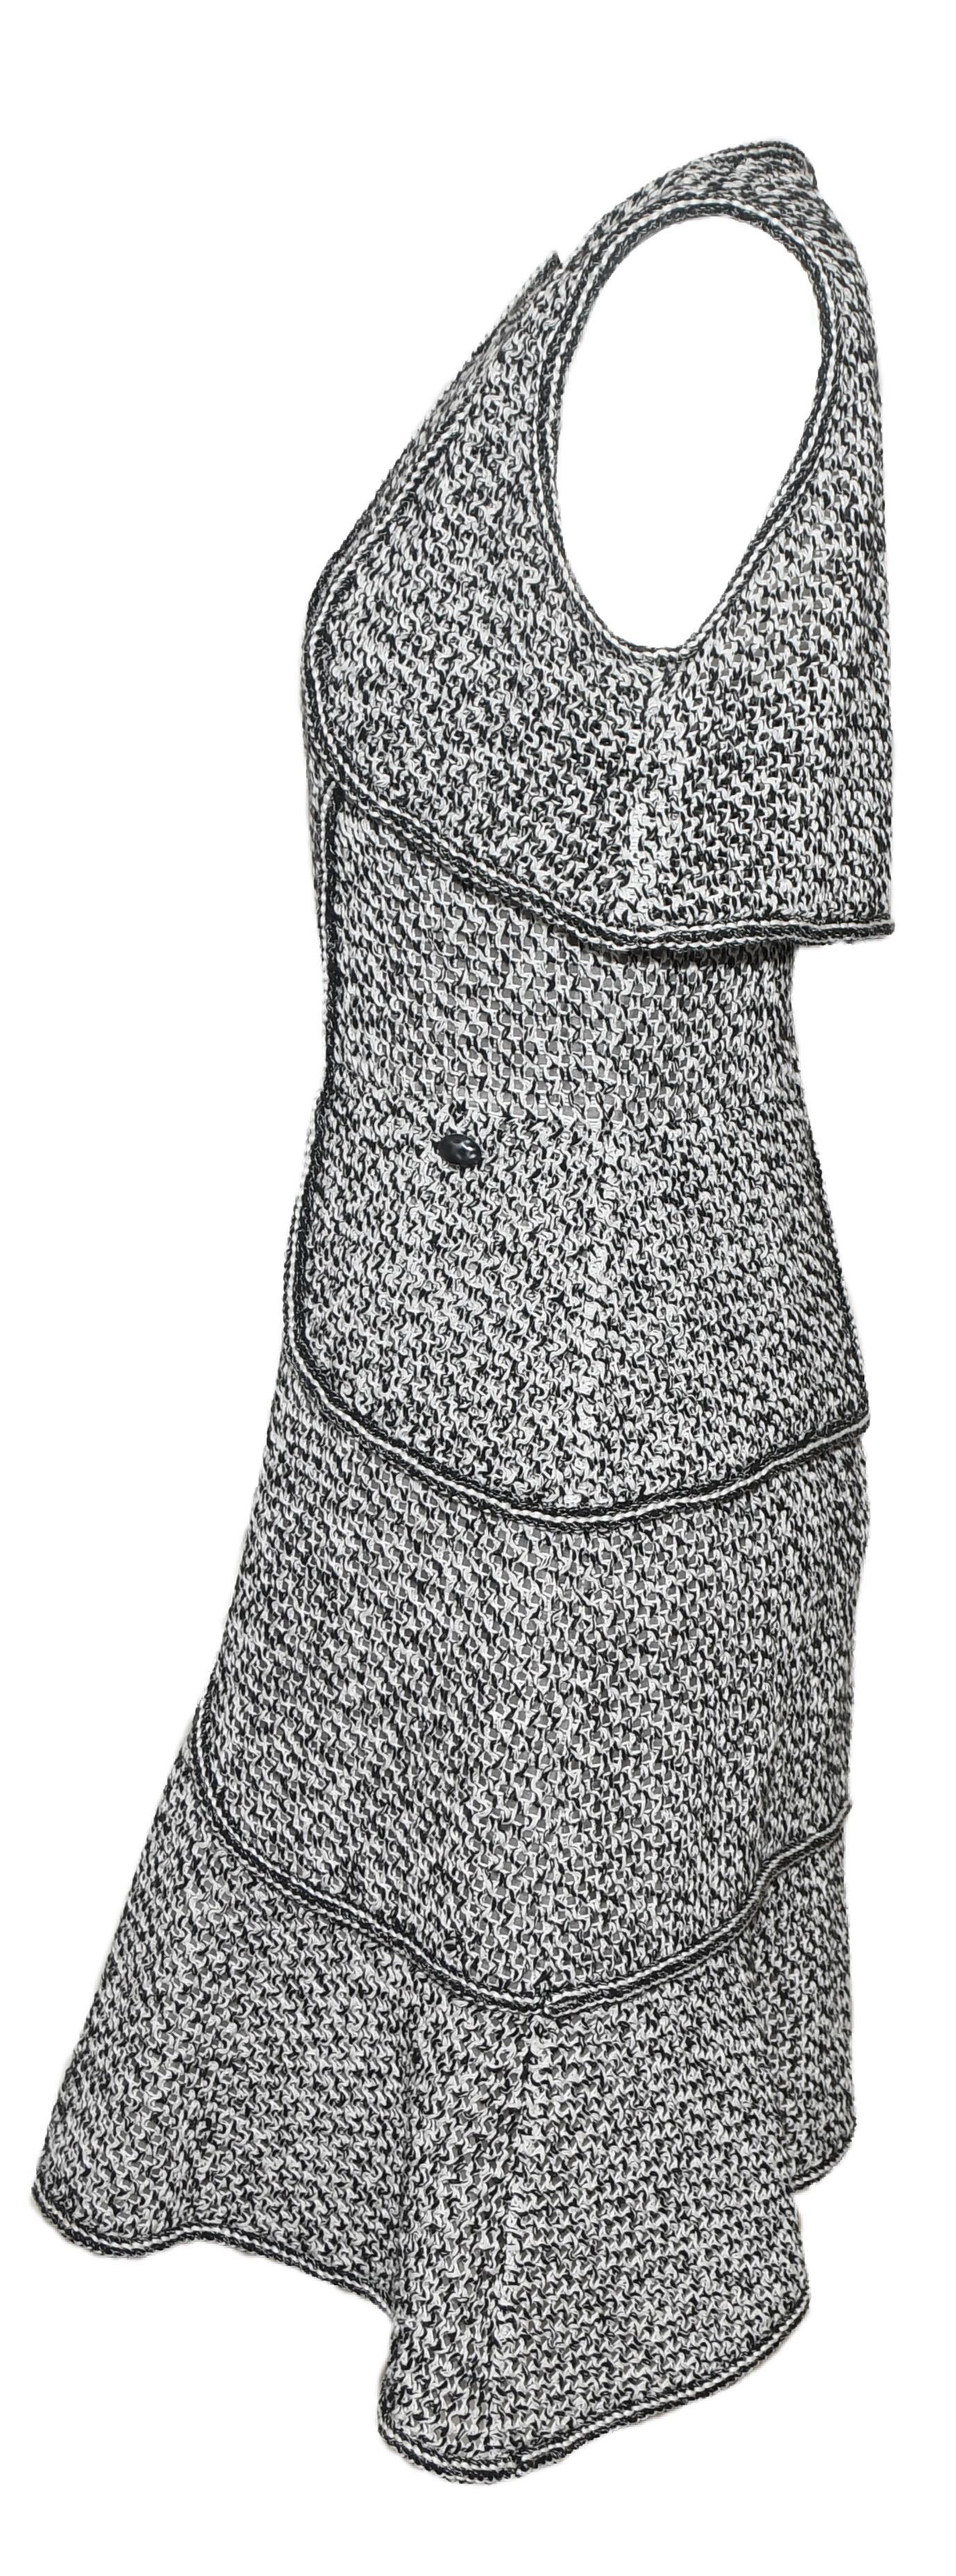 Chanel black and white sleeveless tweed dress contains 3 tiers.  One tier is a faux bolero jacket, second tier is a faux blazer jacket and the third tier is a separation of the dress and the flounce style hem.  Each tier is trimmed with black and